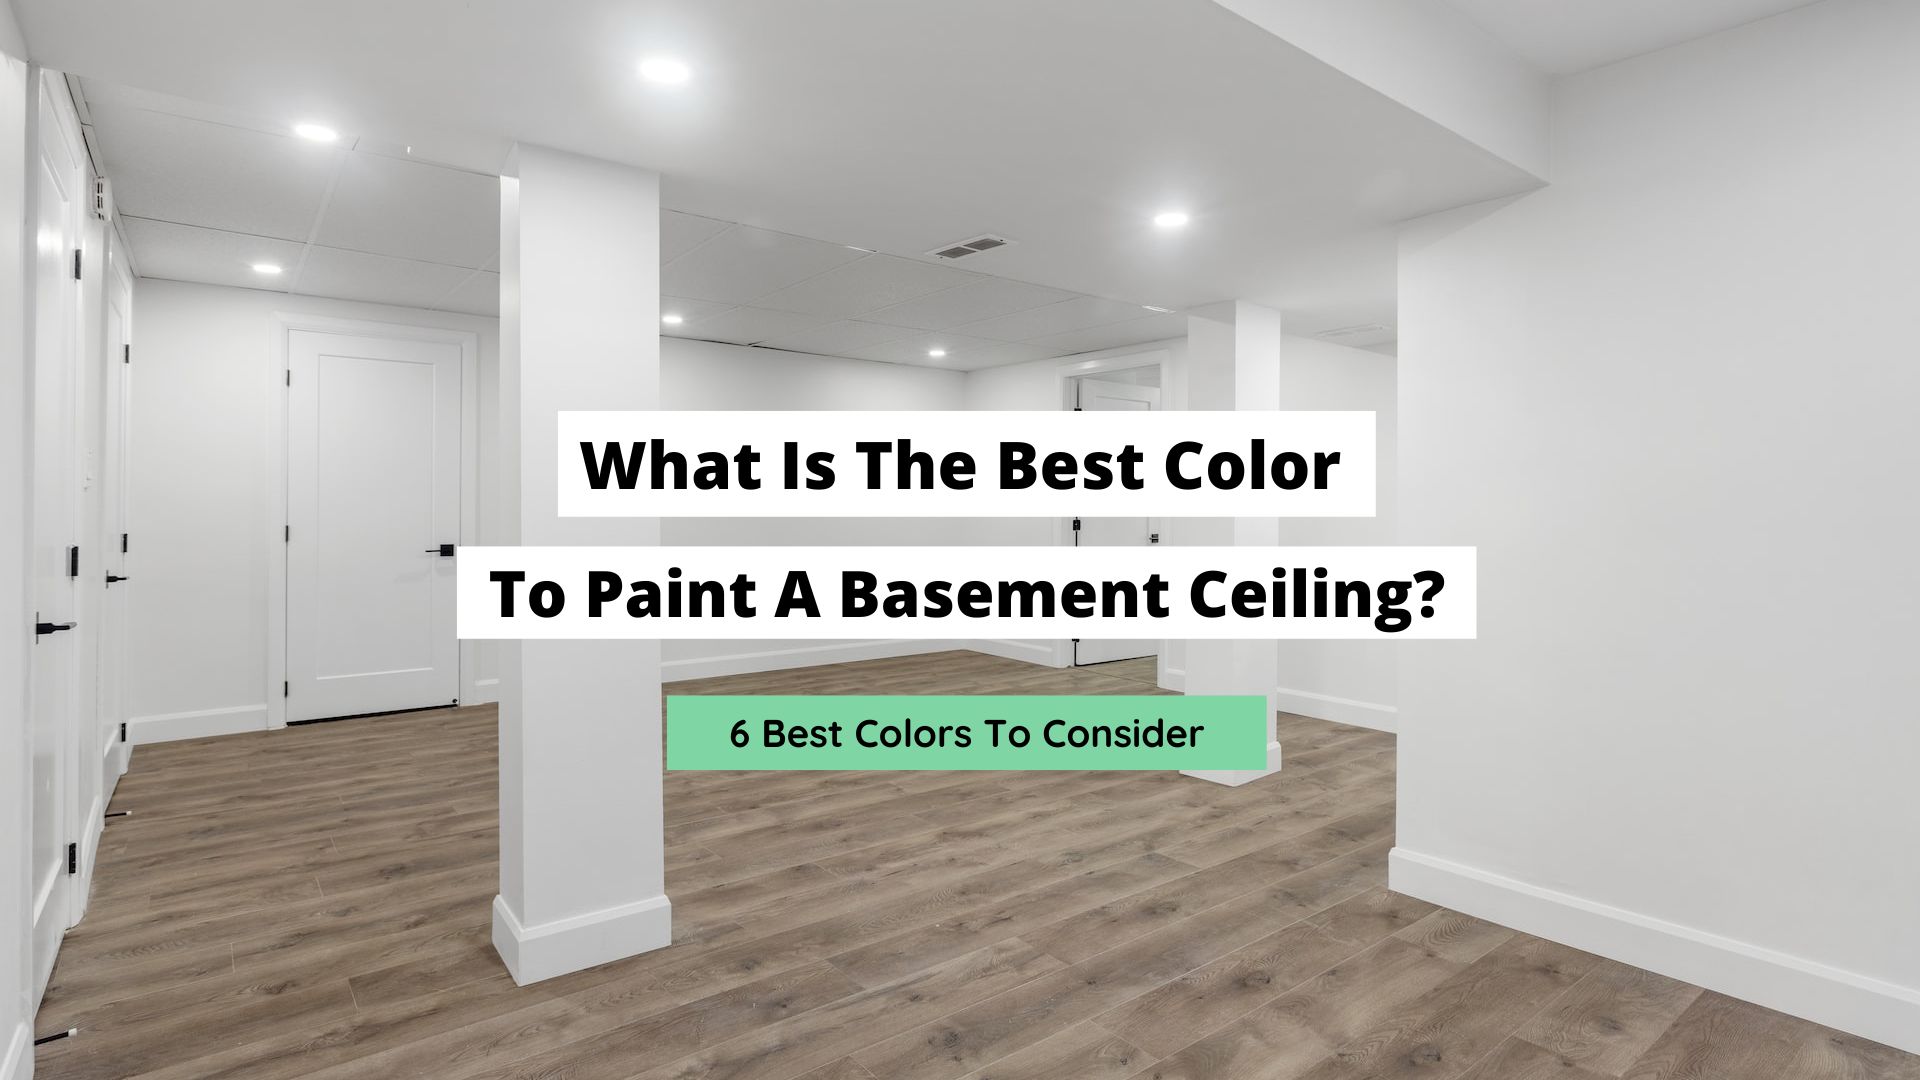 What is the best color to paint a basement ceiling